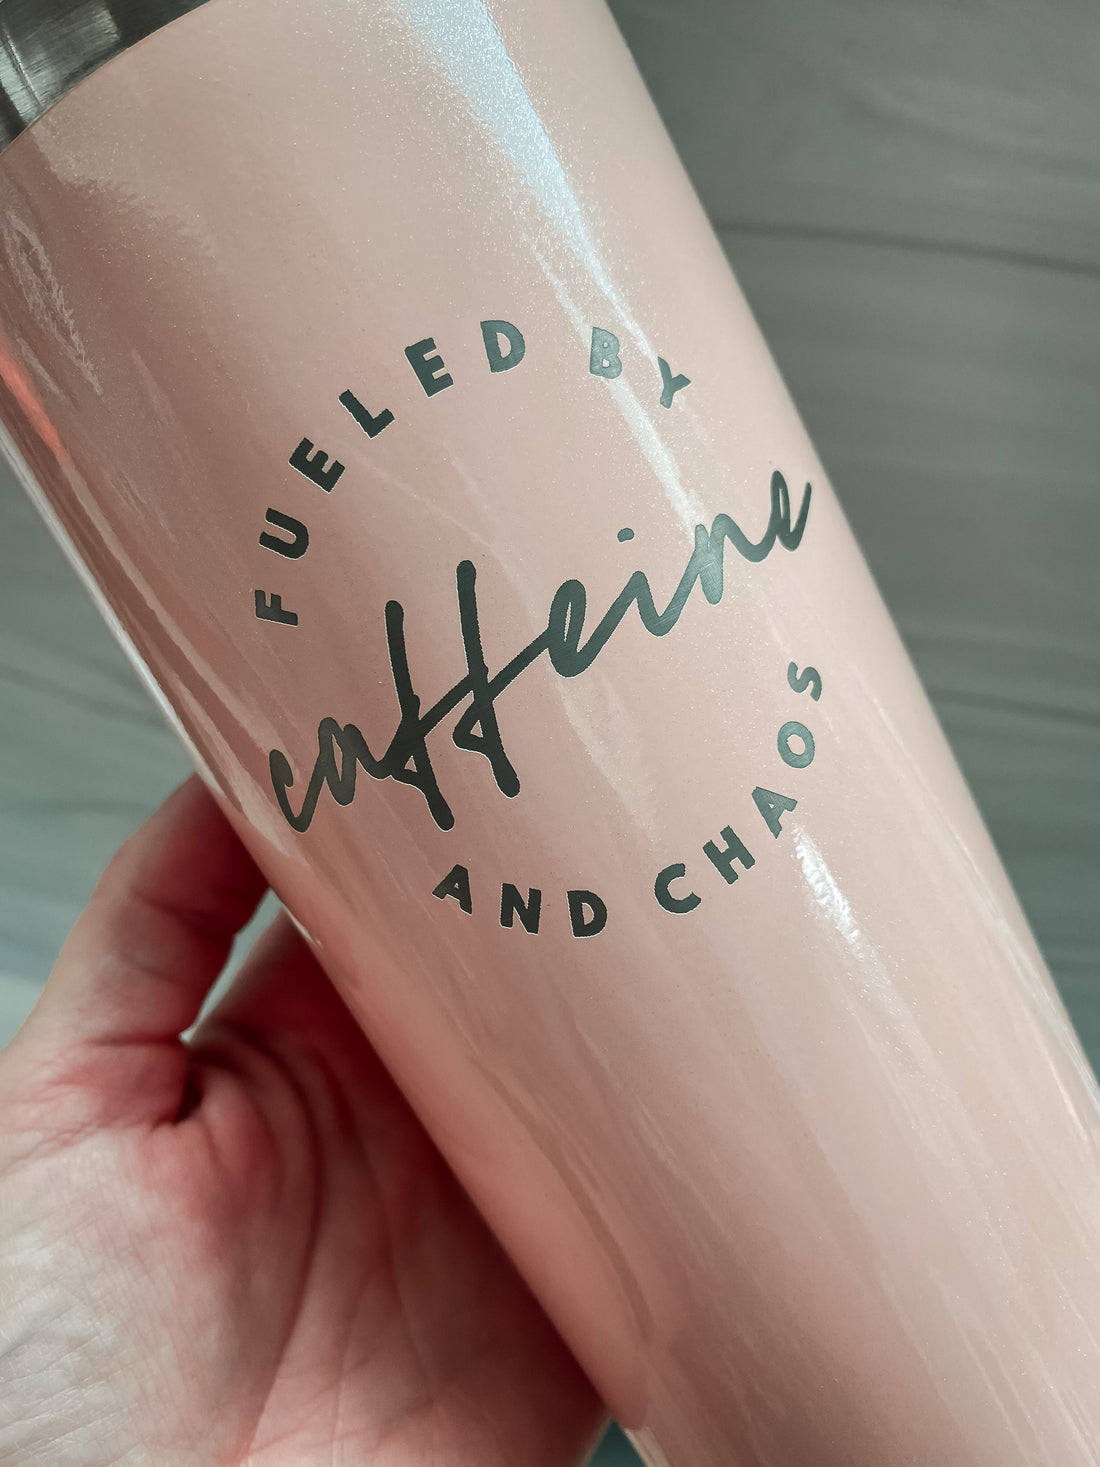 Fueled by Caffeine and Chaos 22oz Blush Glitter Stainless Tumbler